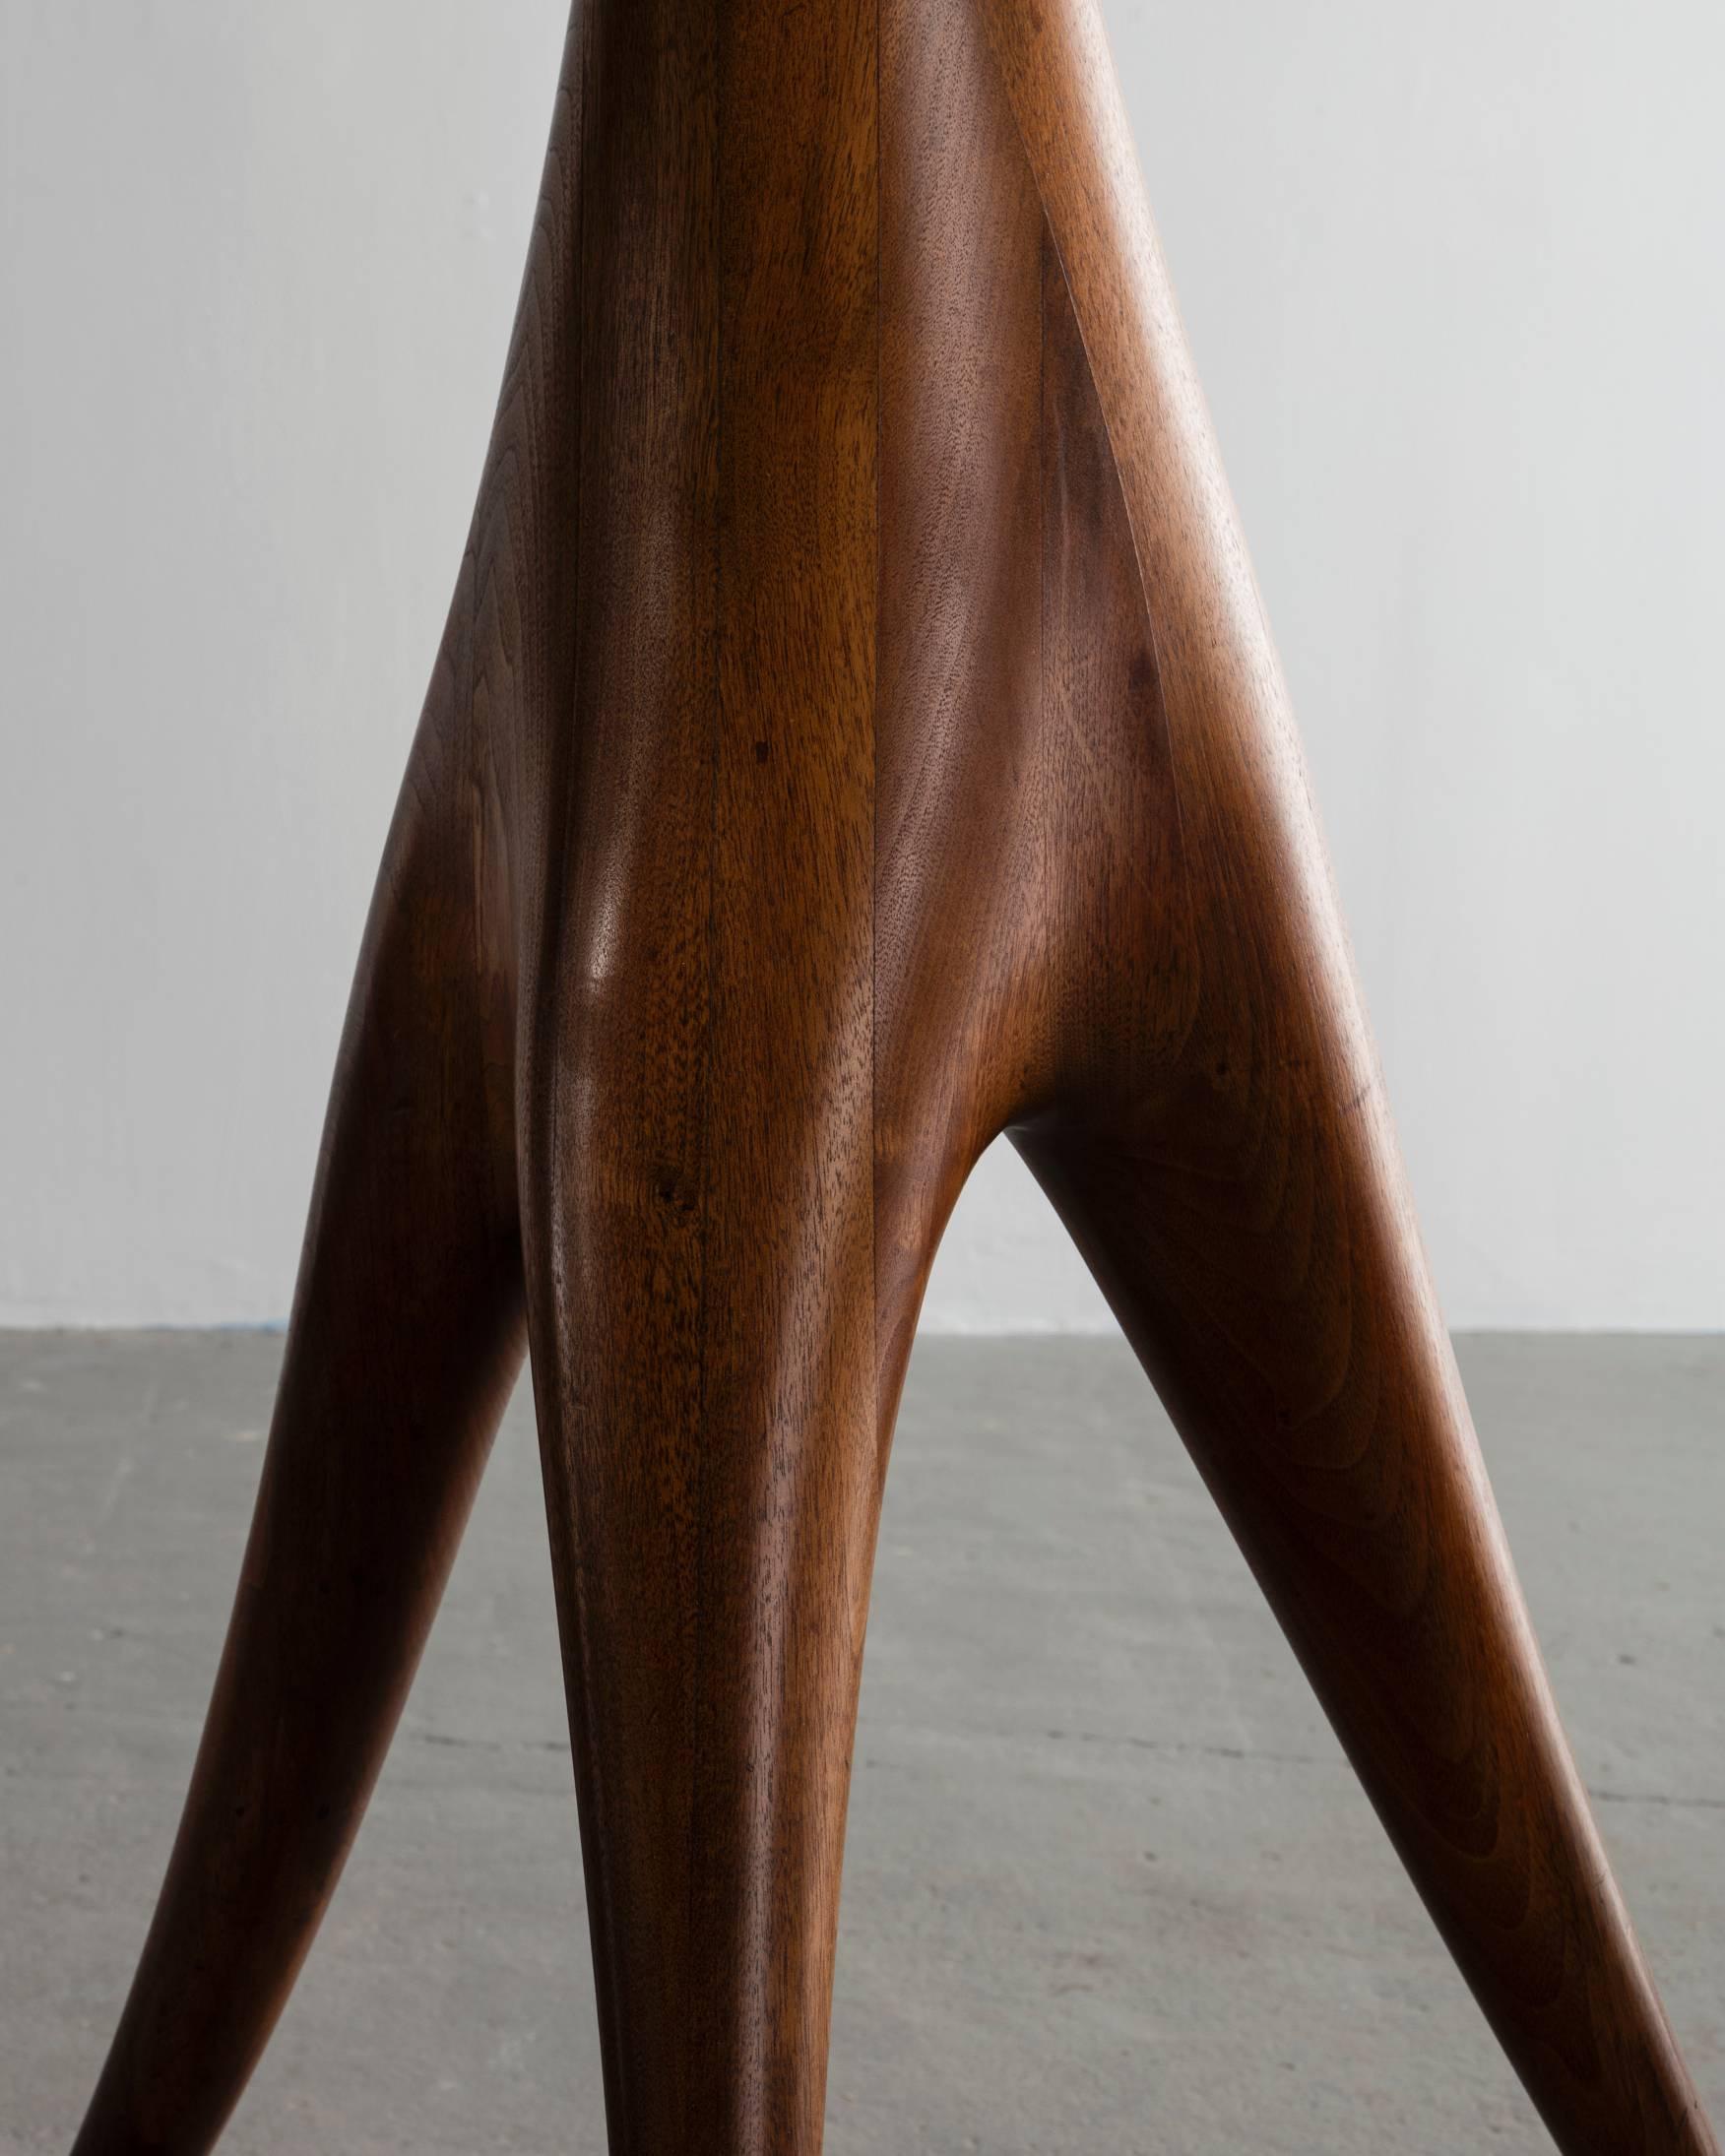 Mid-20th Century Unique Hand-Shaped Floor Lamp by Wendell Castle, New York, circa 1966